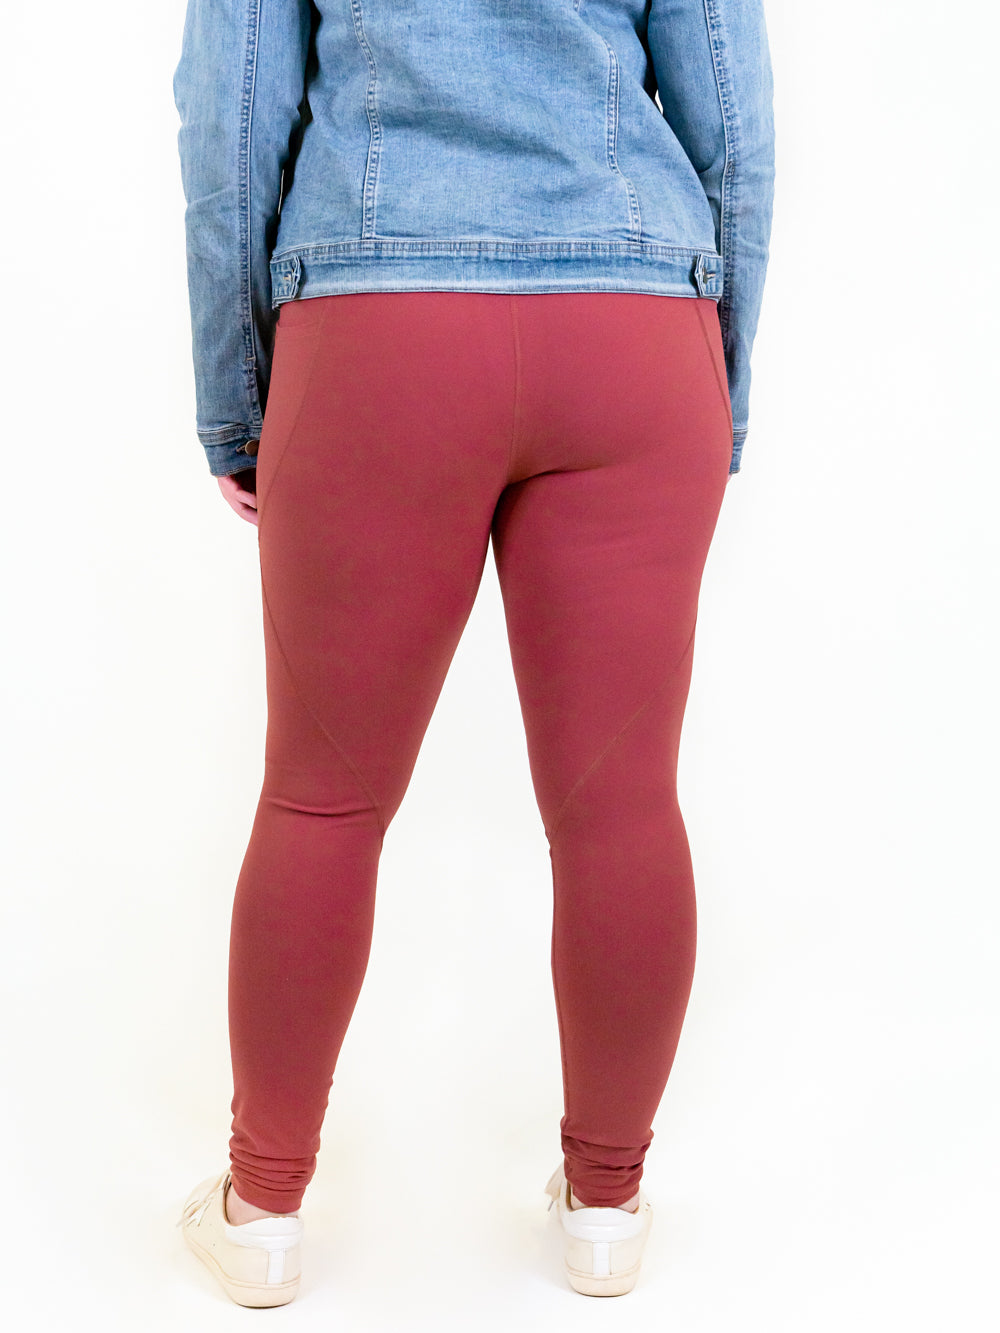 Essential Athletic Tall Legging - Spiced Cider - FINAL SALE